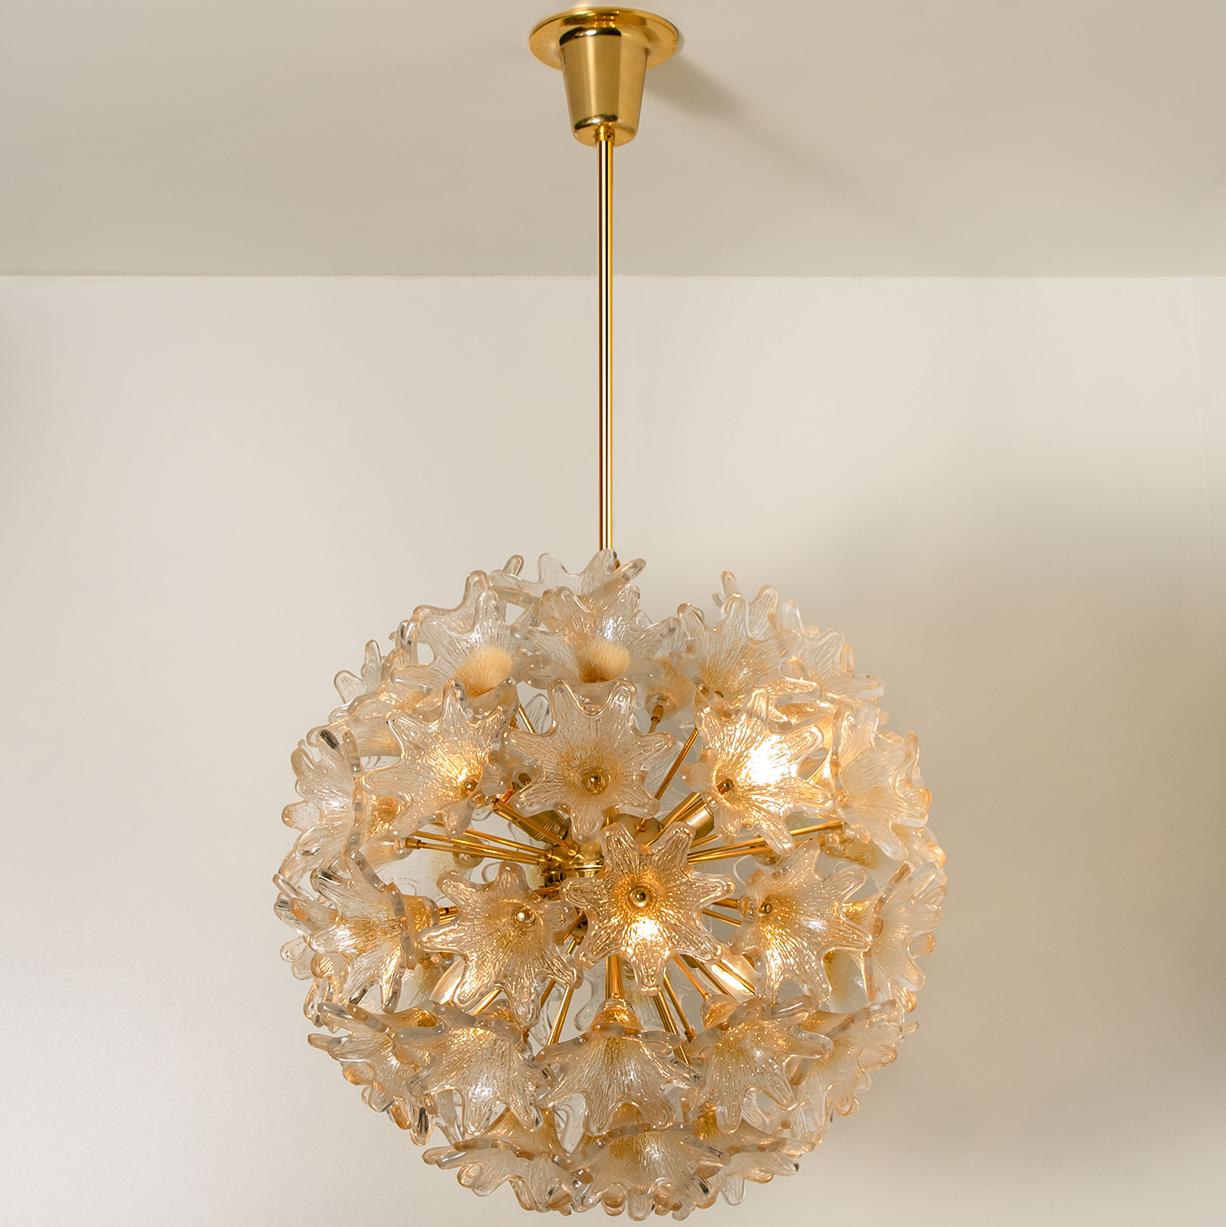 Pair of Brass Gold Murano Glass Sputnik Light Fixtures by Paolo Venini for VeArt 6